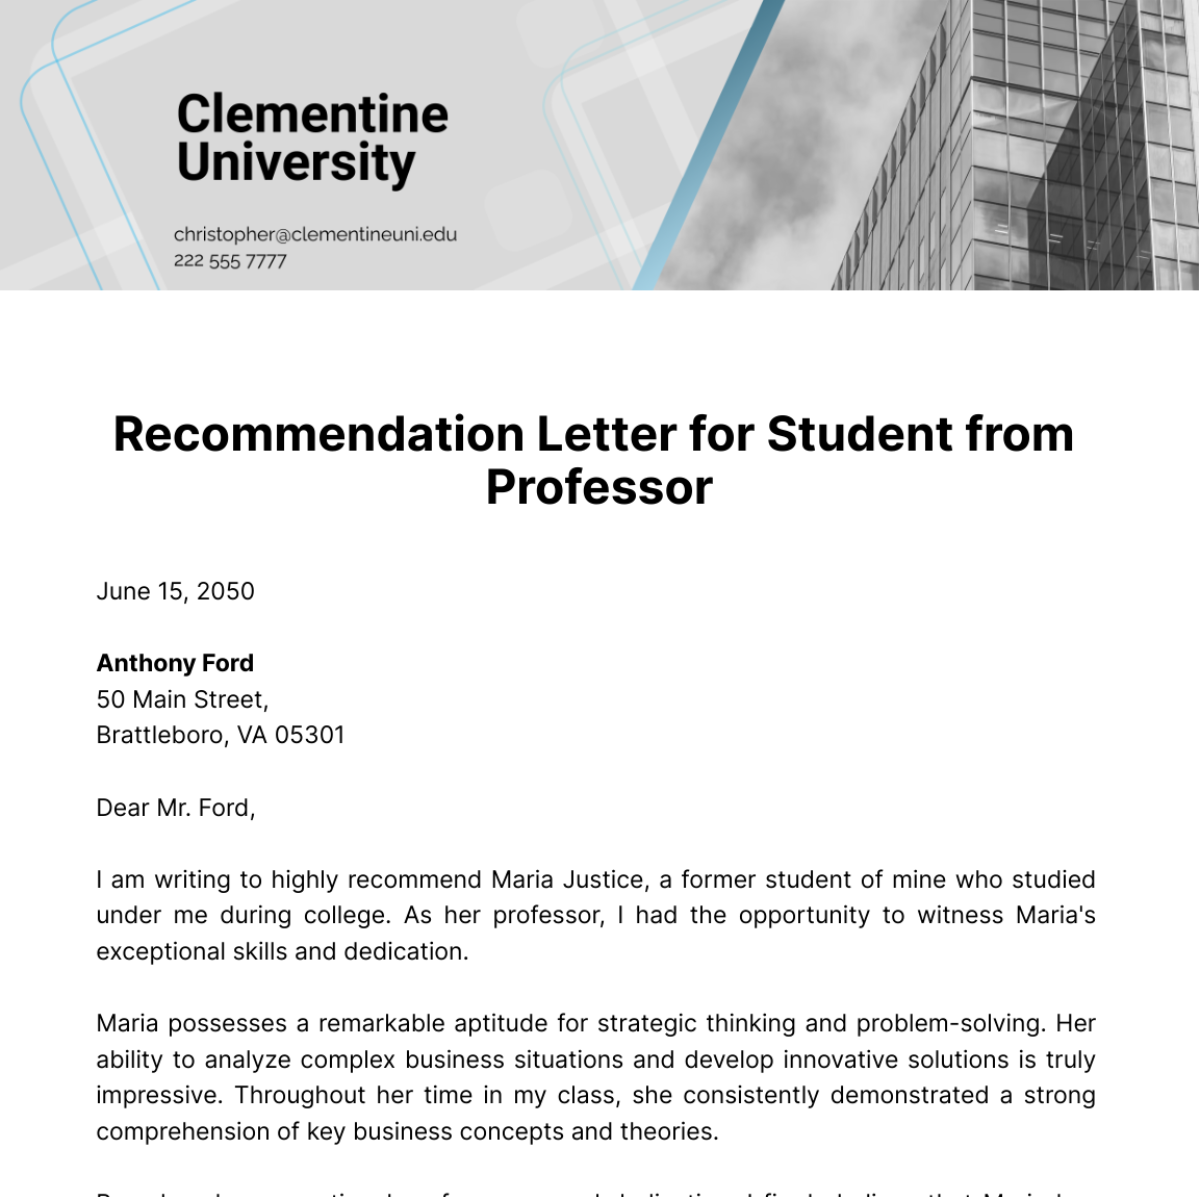 Recommendation Letter for Student from Professor   Template